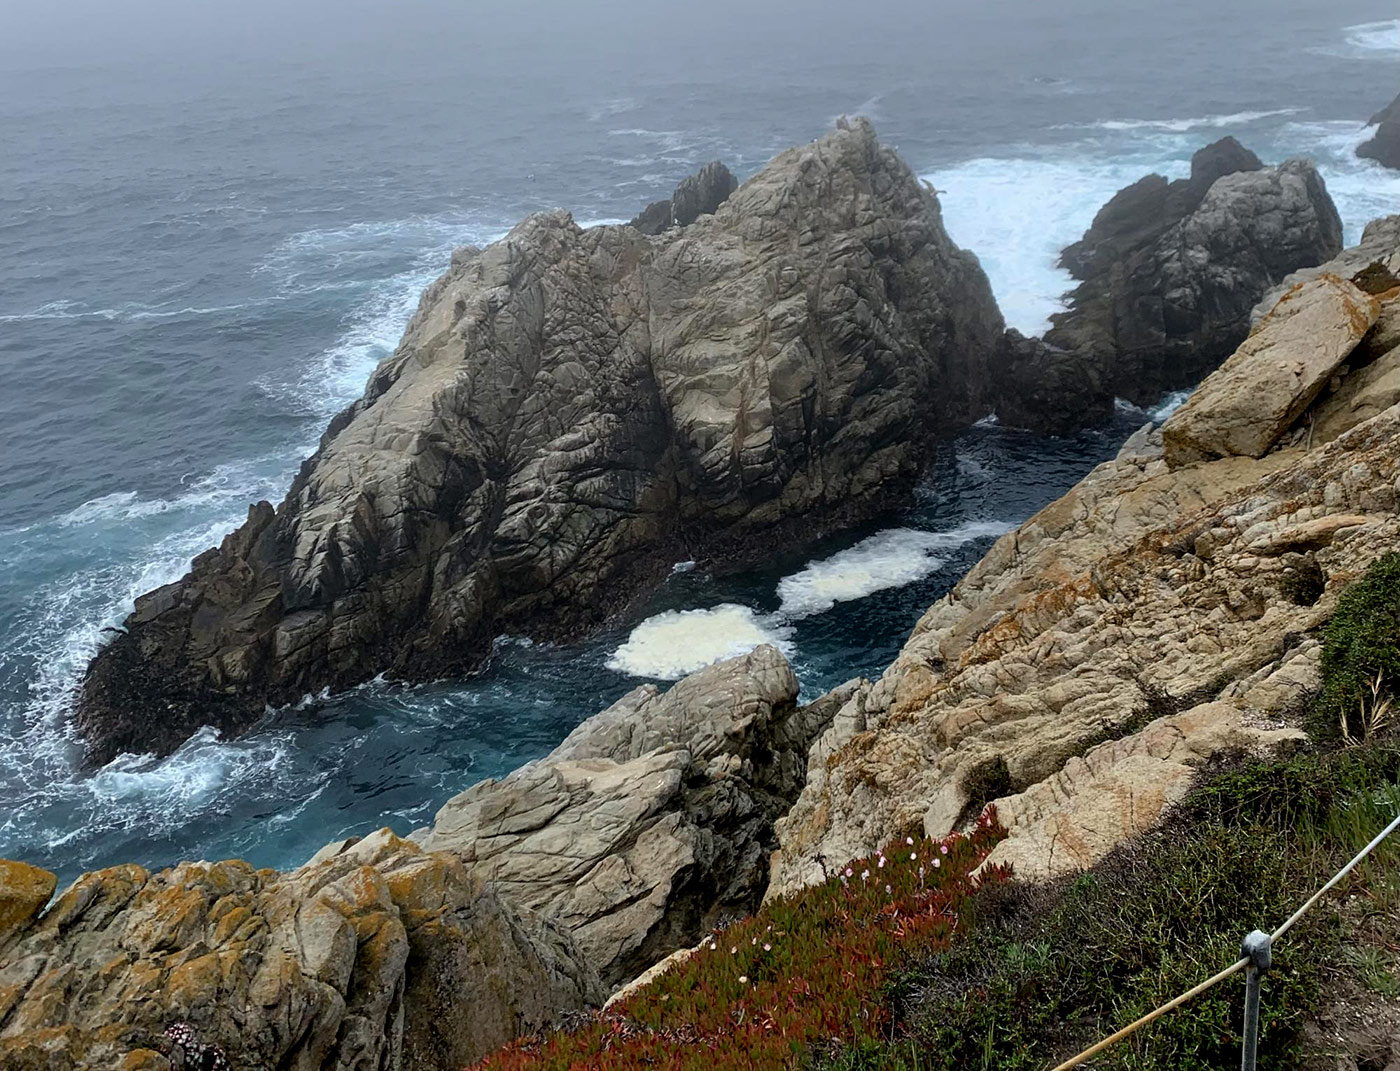 Point Lobos State Natural Reserve, foggy day on Cypress Grove trail. Photo credit: Donita Grace.